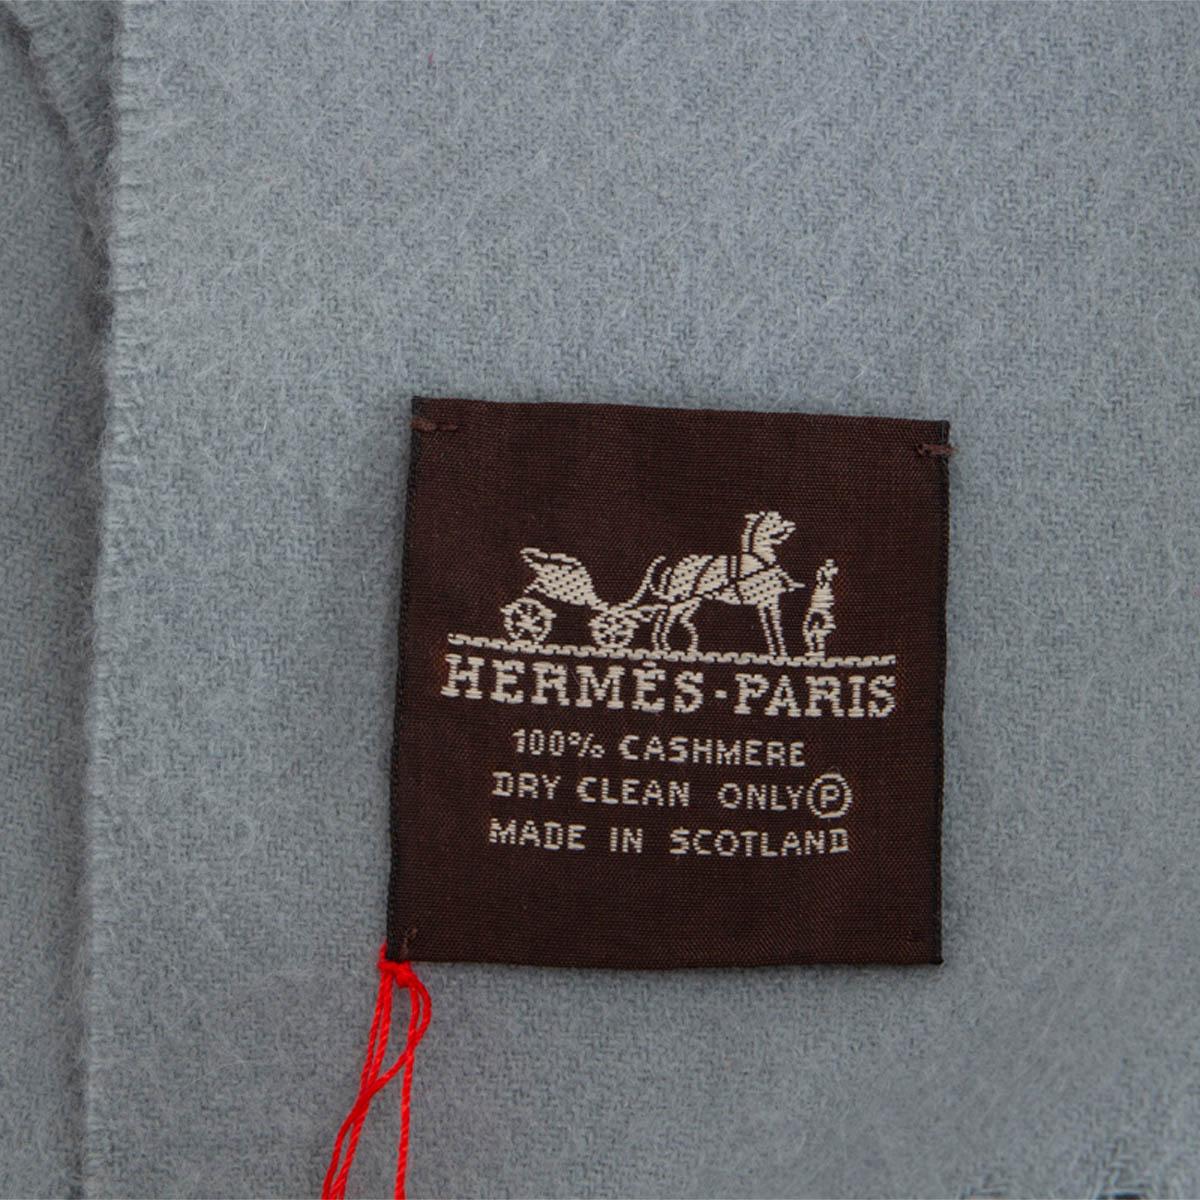 HERMES pale blue cashmere FRINGED SELLIER Shawl Scarf In Excellent Condition For Sale In Zürich, CH